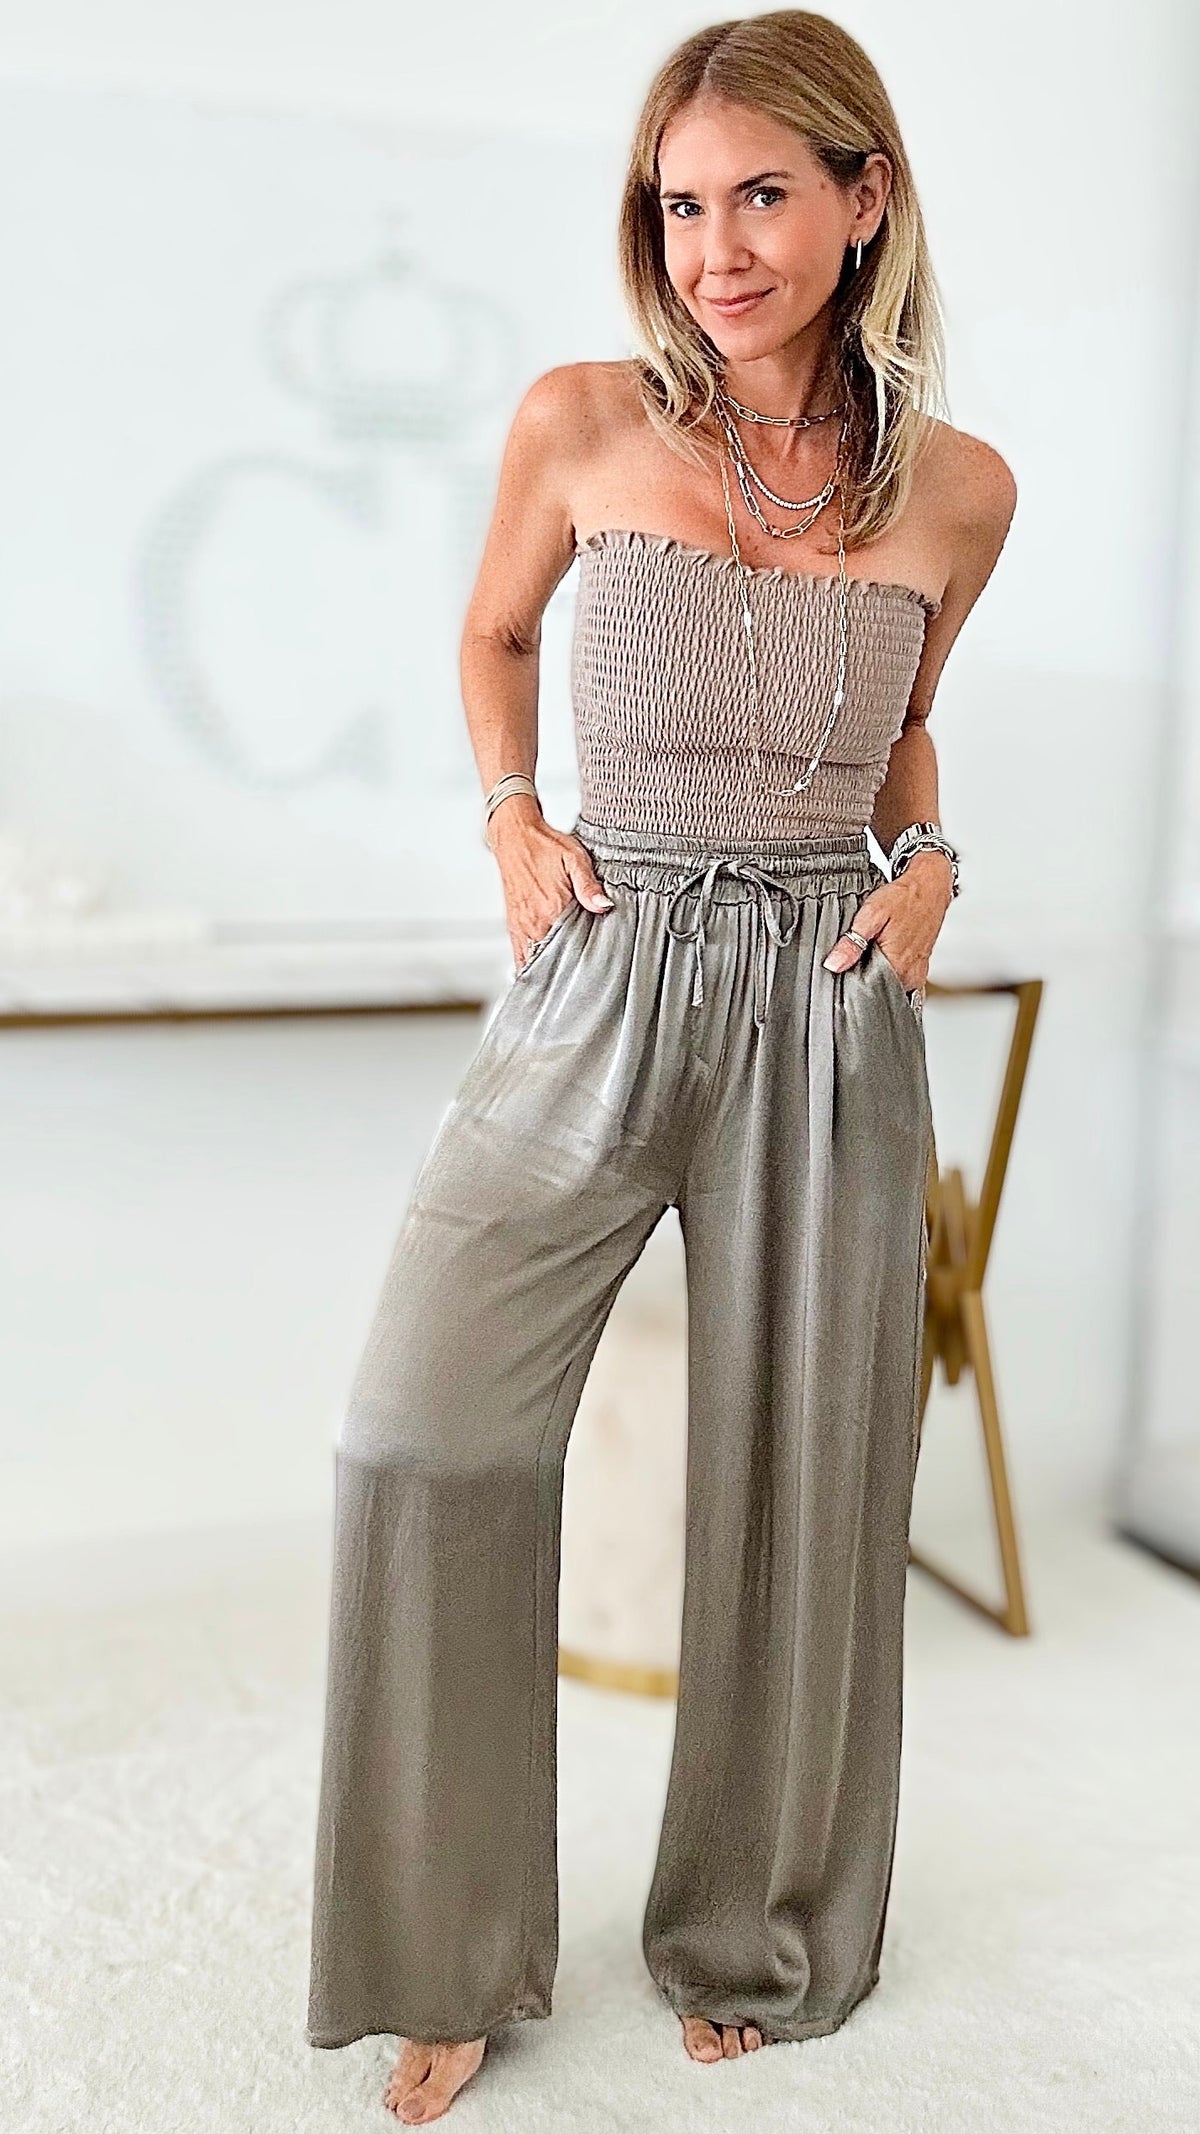 Angora Italian Satin Pant - Metallic Pewter-170 Bottoms-Germany-Coastal Bloom Boutique, find the trendiest versions of the popular styles and looks Located in Indialantic, FL